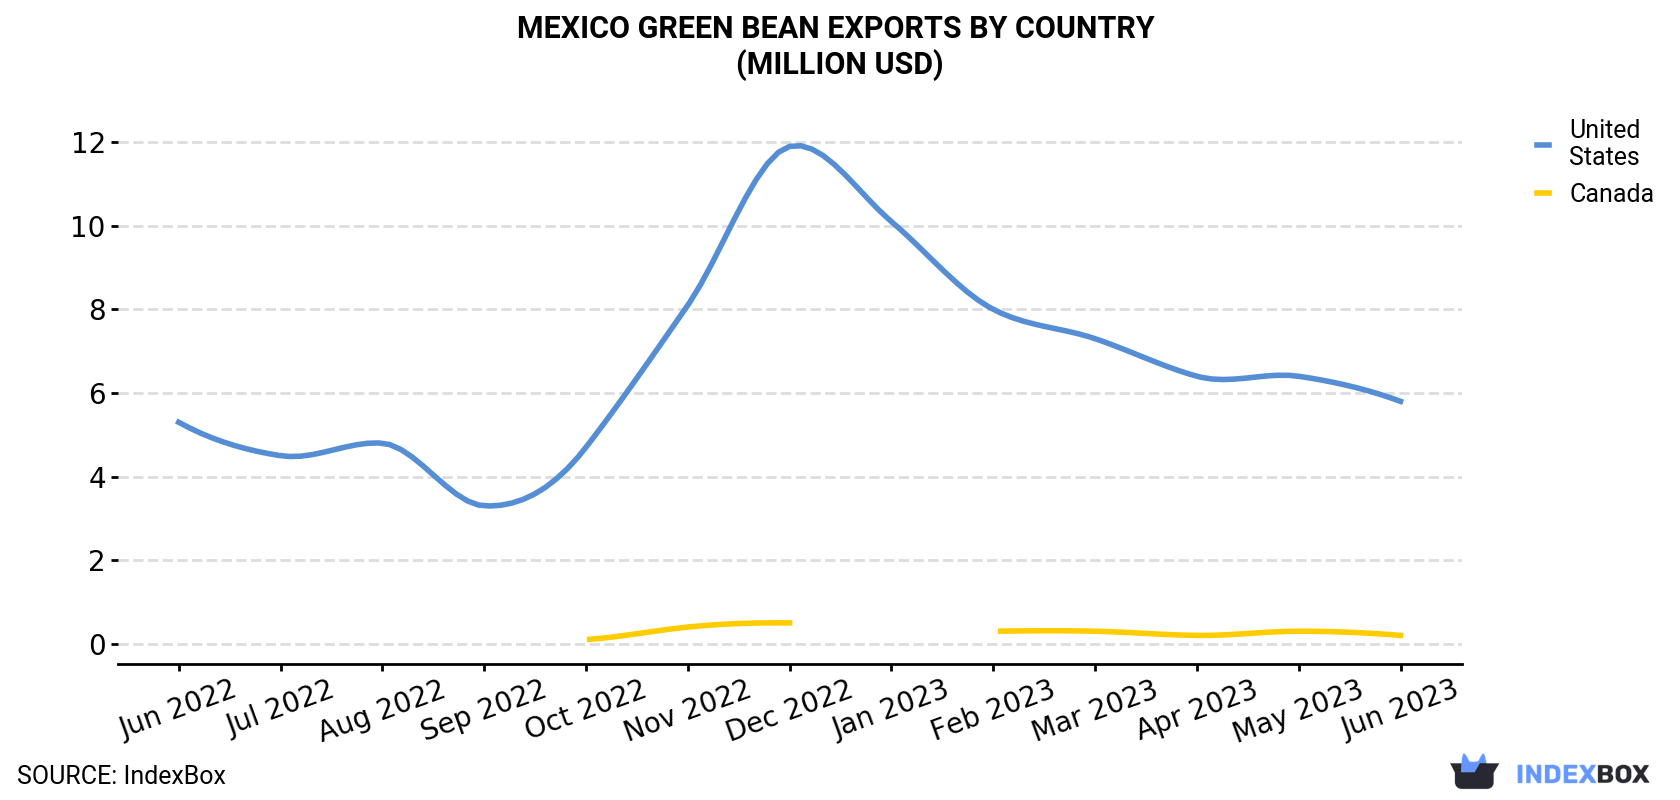 Mexico Green Bean Exports By Country (Million USD)